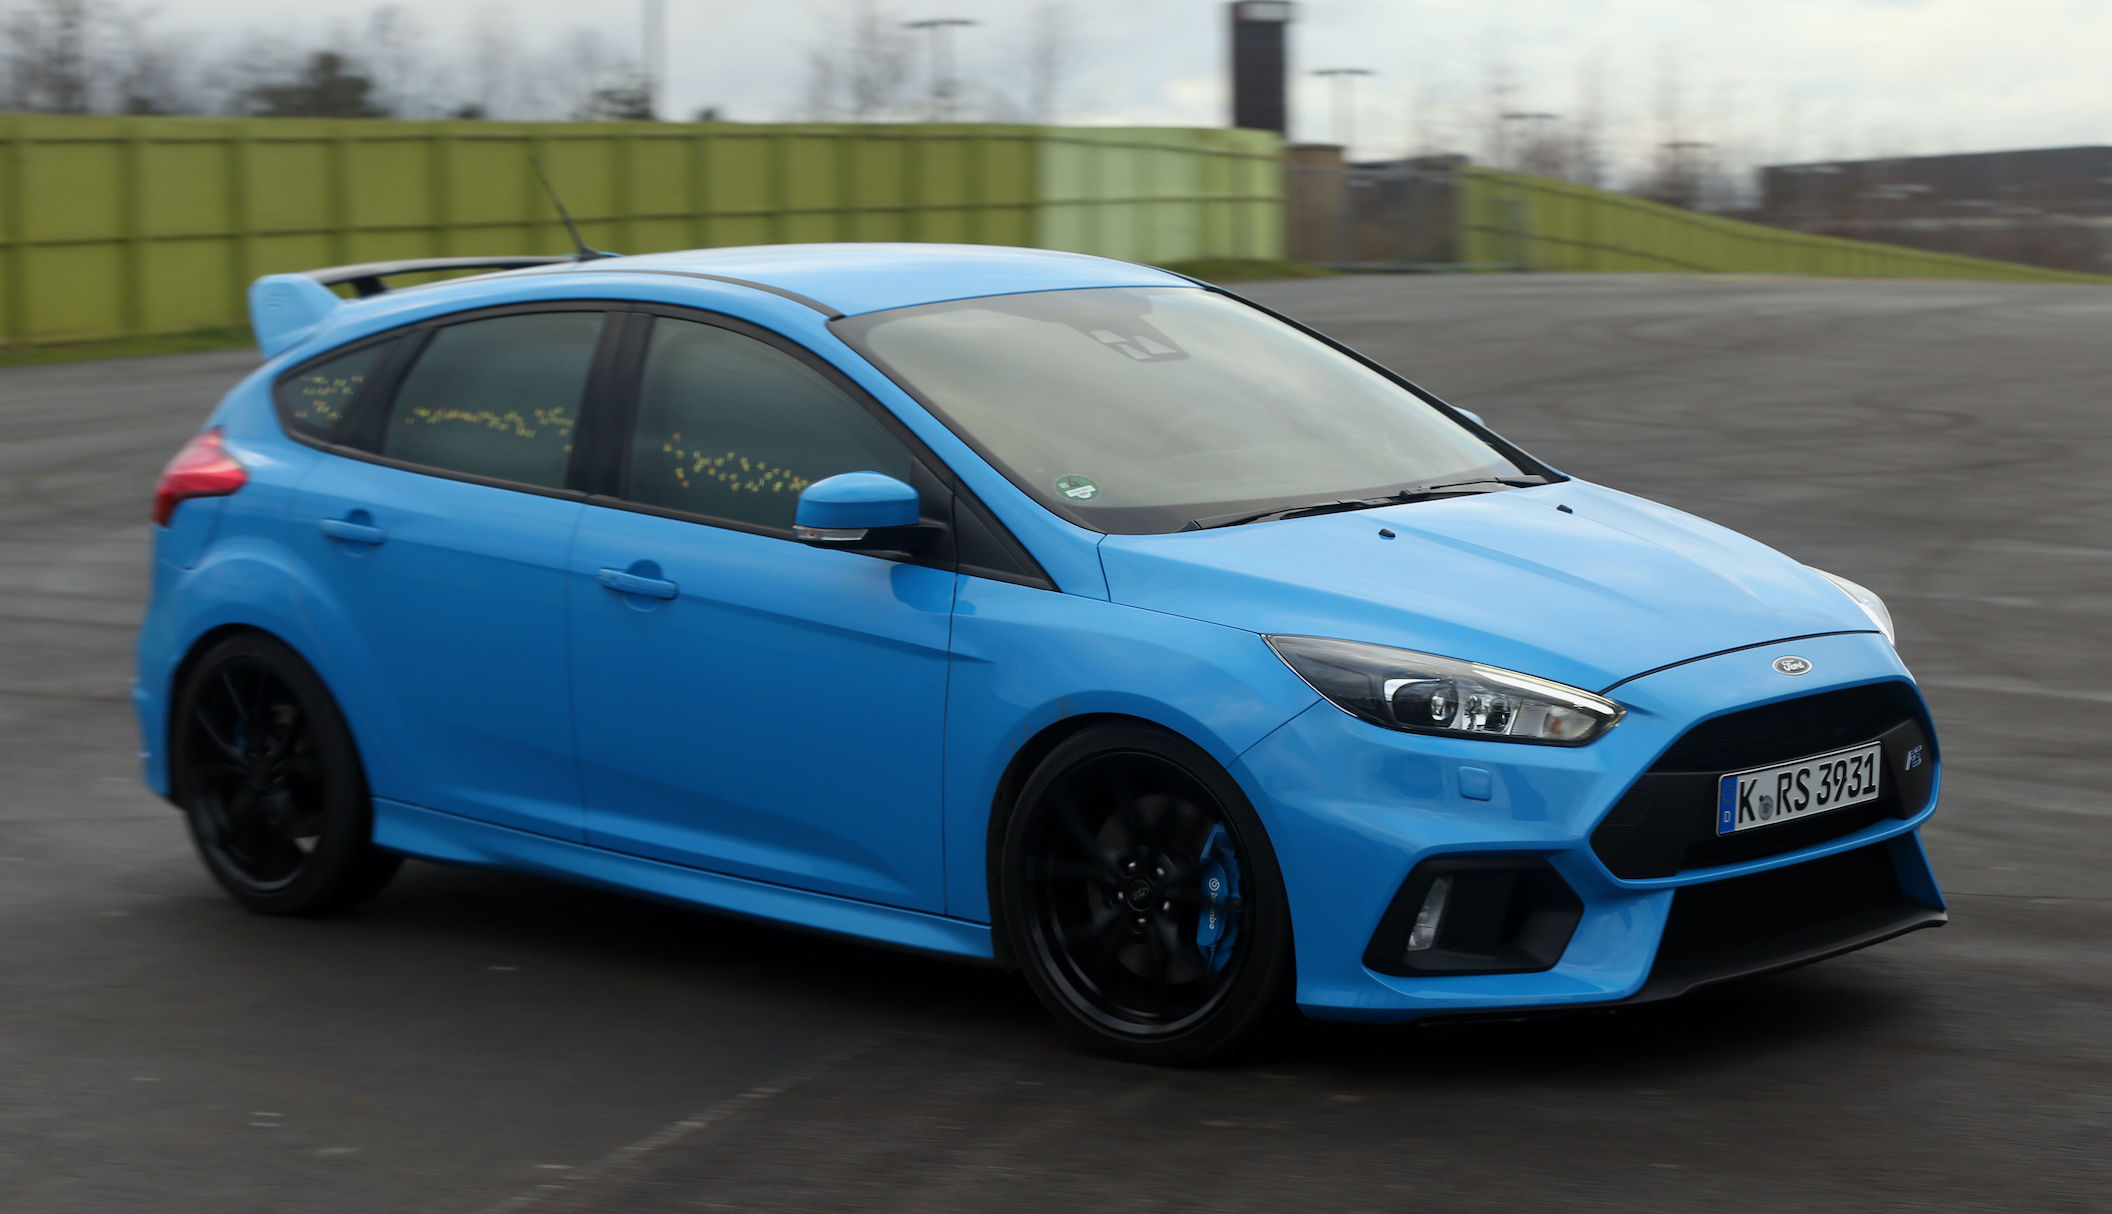 The Ford Focus RS is the Best Car You Probably Shouldn't Buy